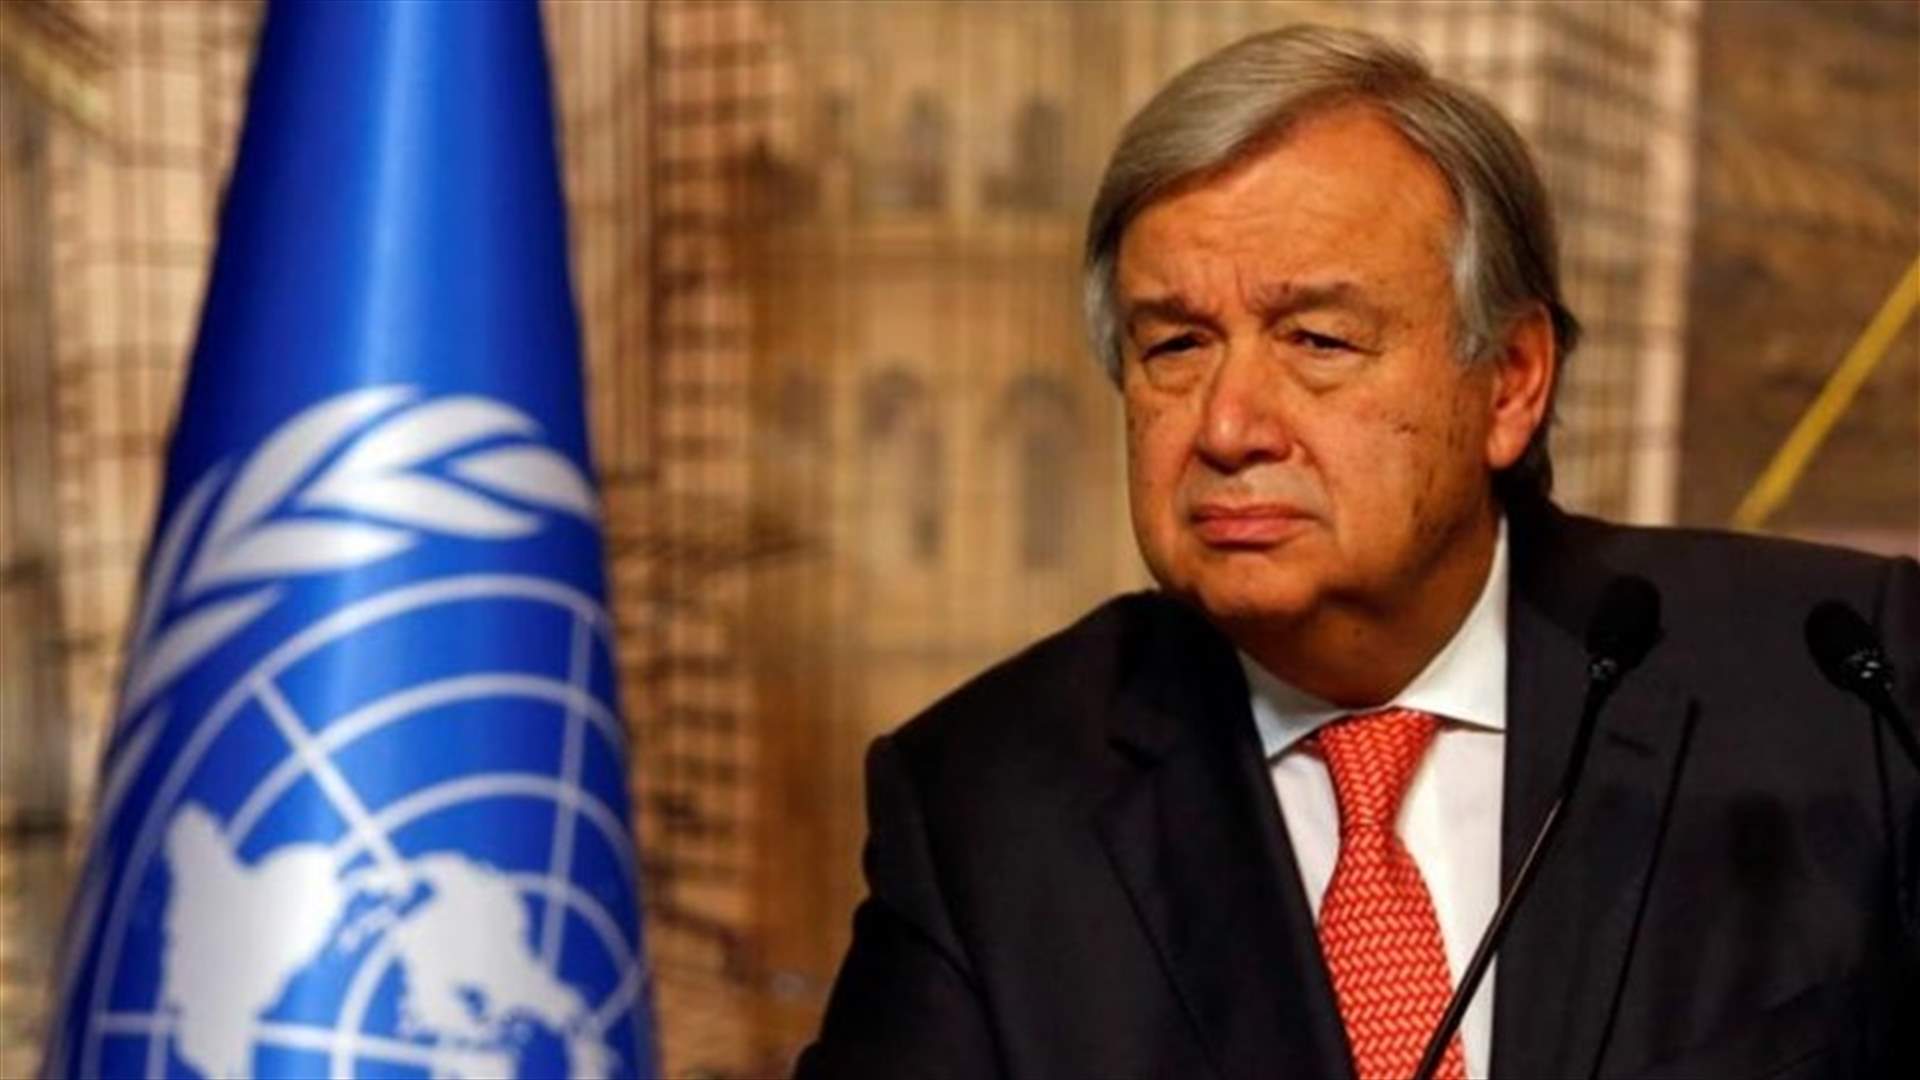 UN chief affirms full support for Yemen peace envoy